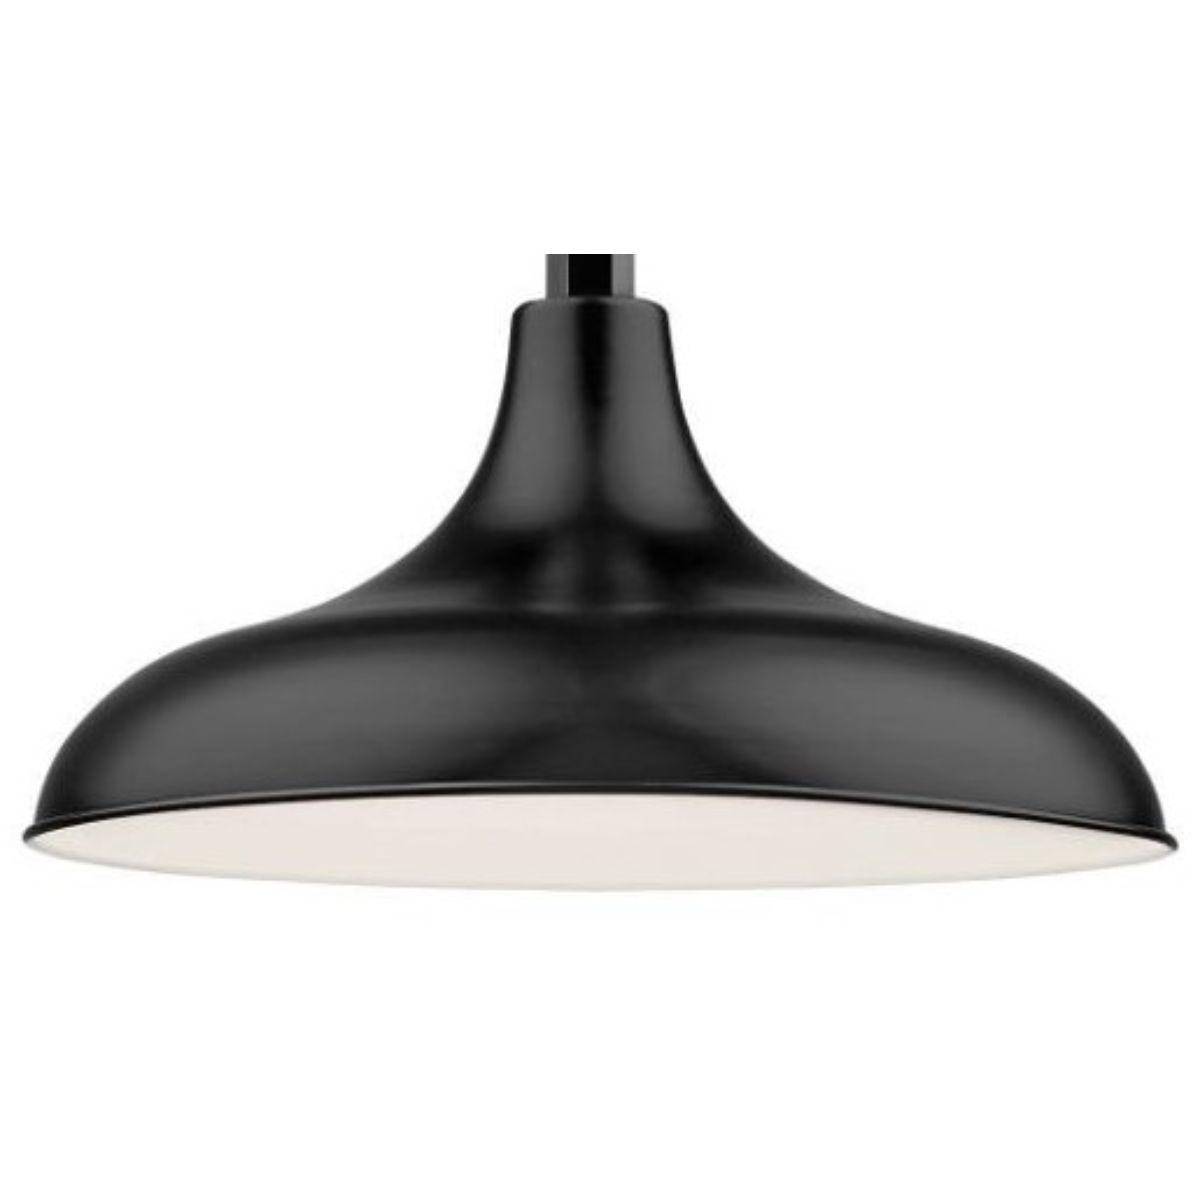 R Series 17 In. Satin Black Outdoor Modified Warehouse Shade with 3/4 In. Fitter